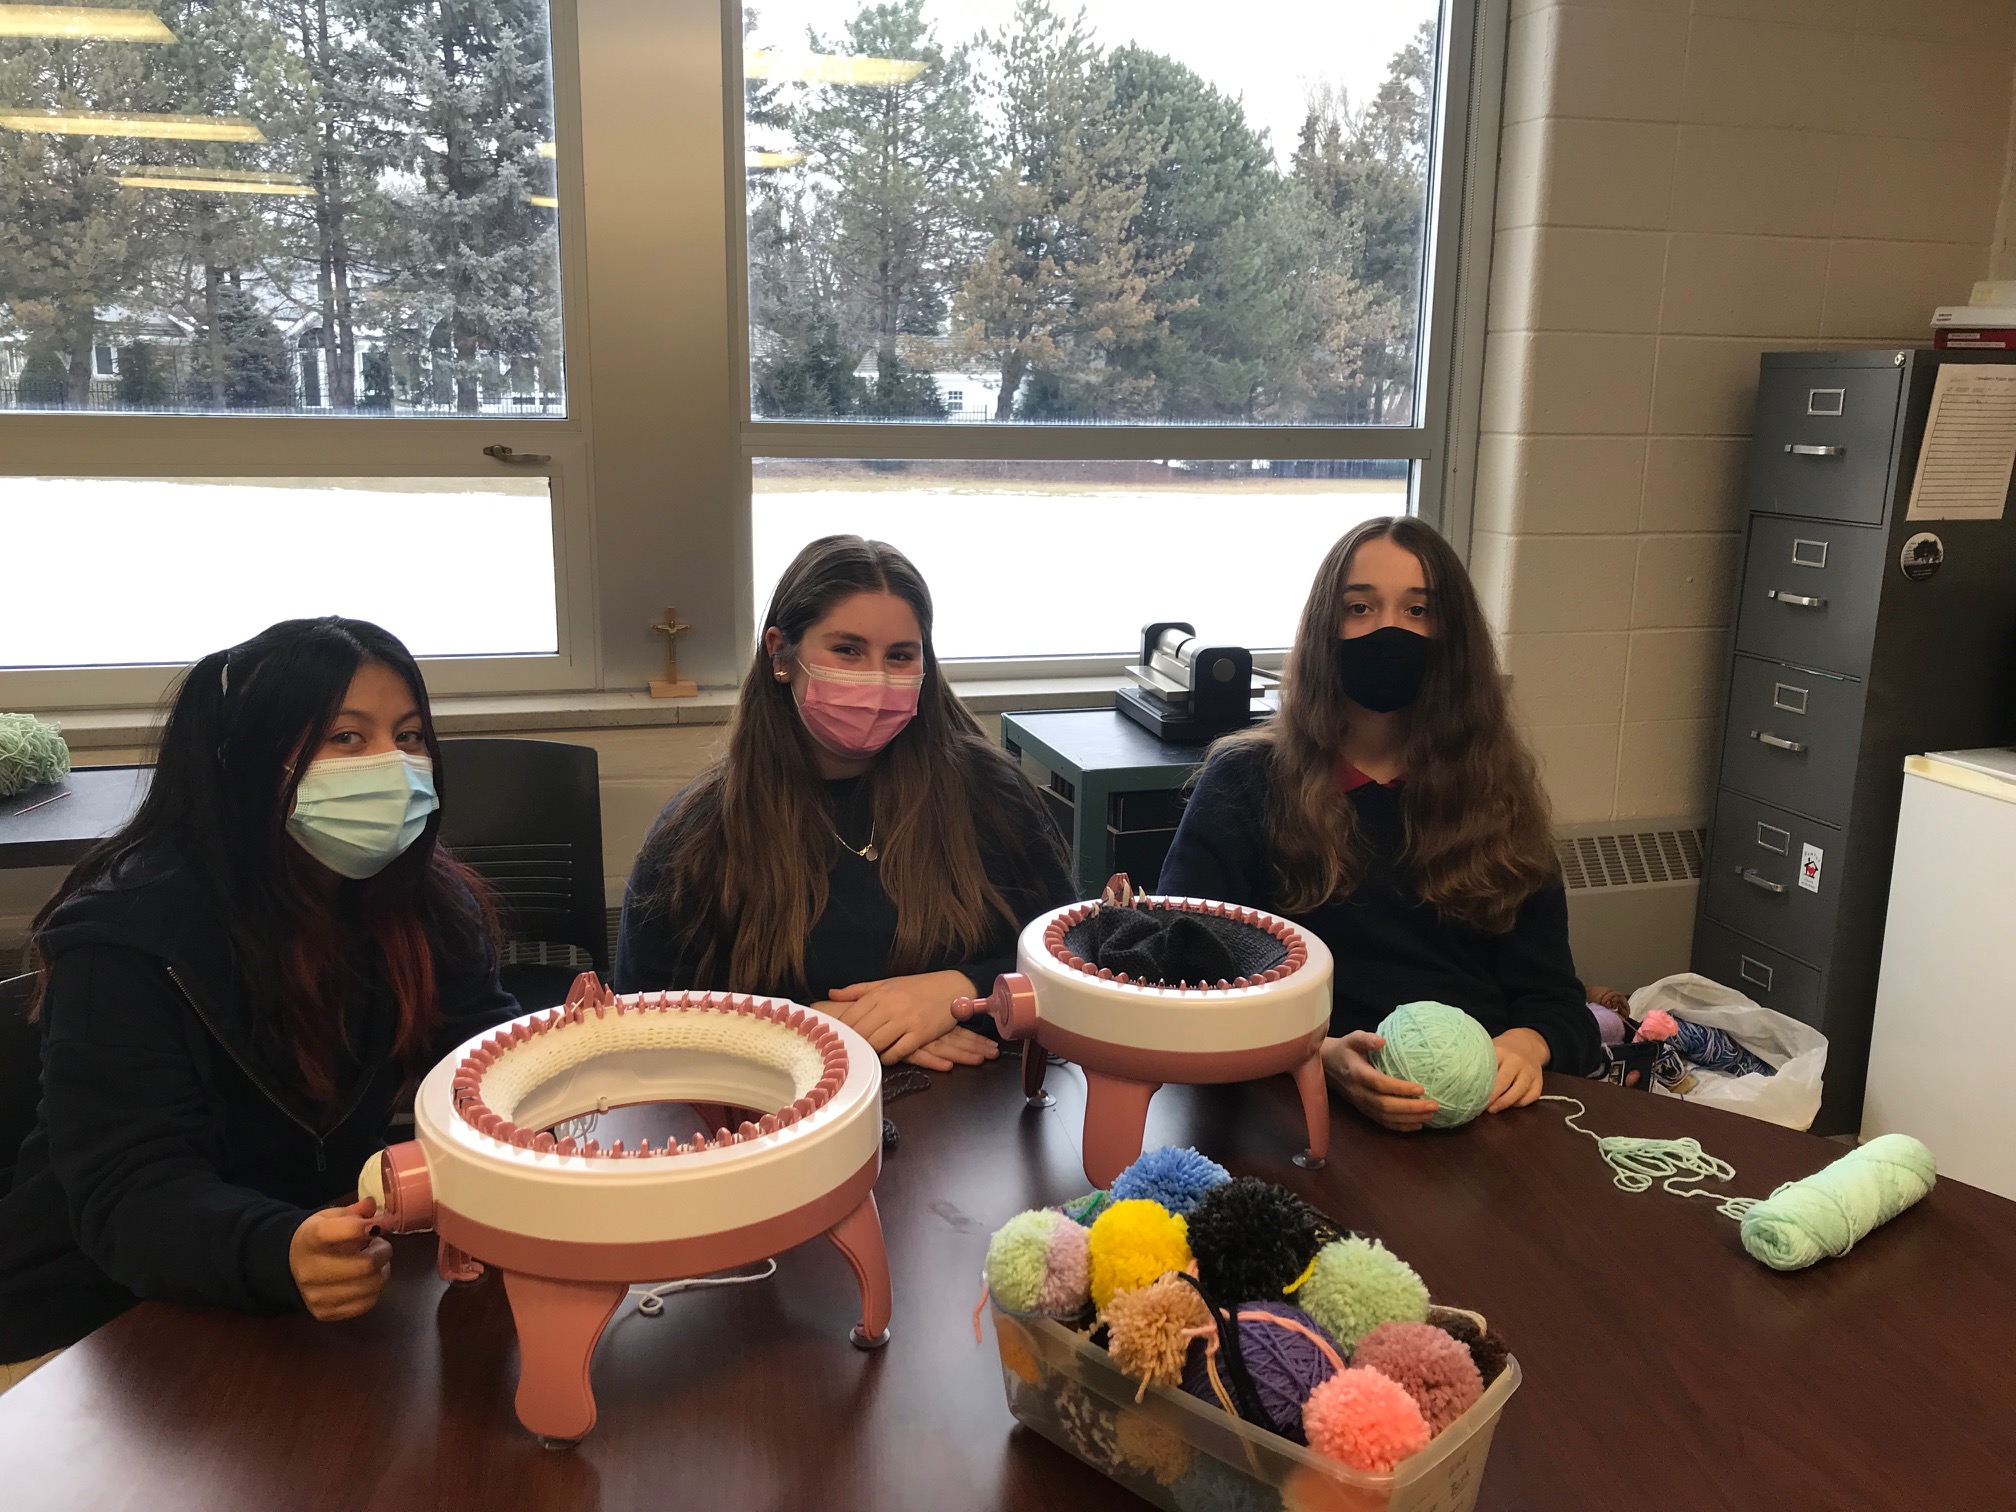 Students from Fr. Allouez Catholic School knit hats to raise funds for HHH